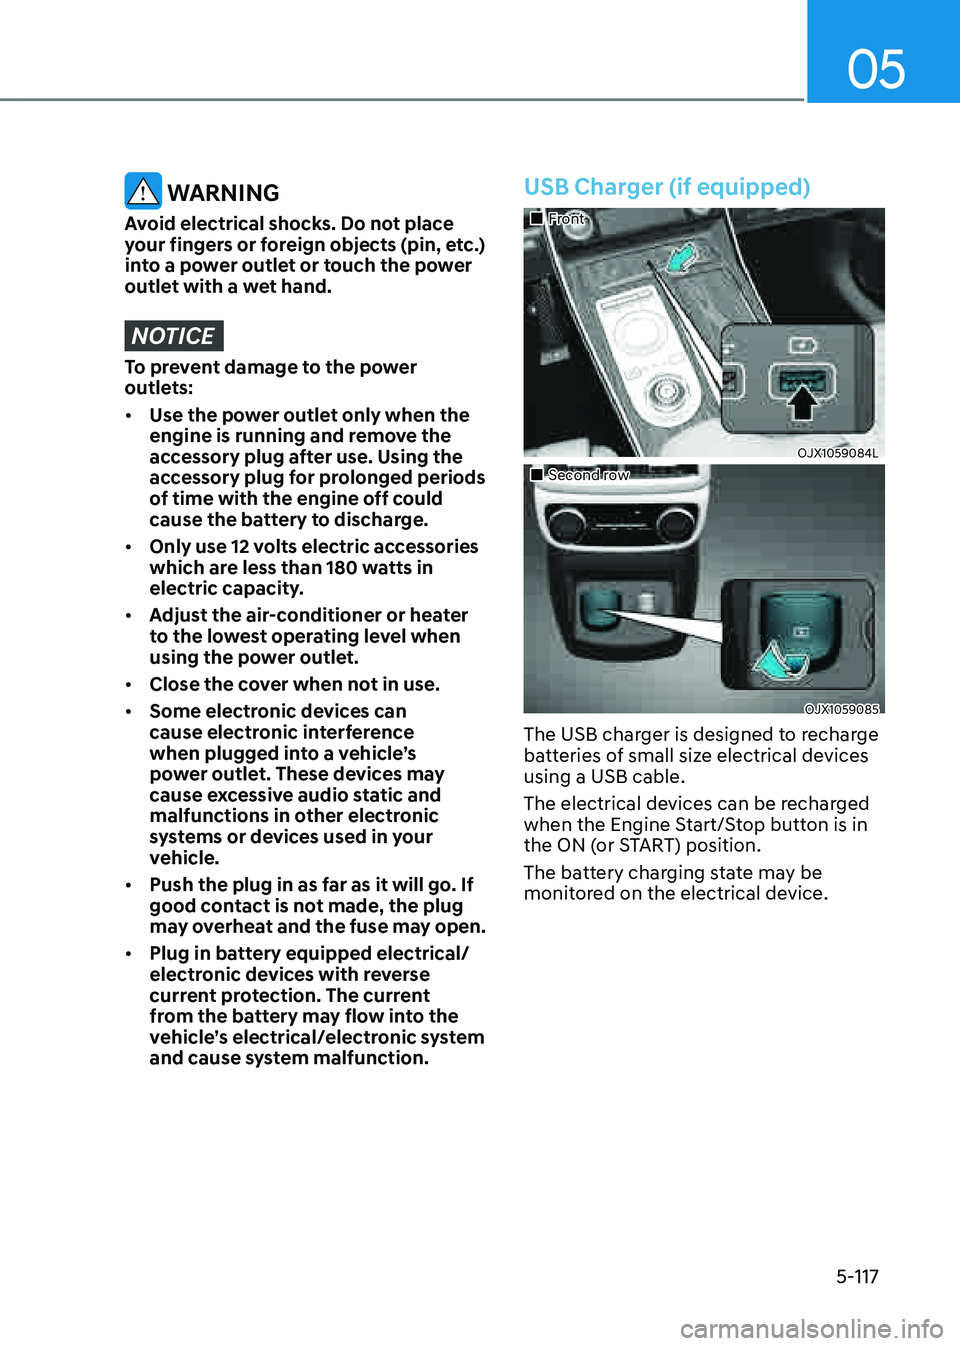 GENESIS GV80 2021  Owners Manual 05
5-117
 WARNING
Avoid electrical shocks. Do not place 
your fingers or foreign objects (pin, etc.) 
into a power outlet or touch the power 
outlet with a wet hand.
NOTICE
To prevent damage to the po